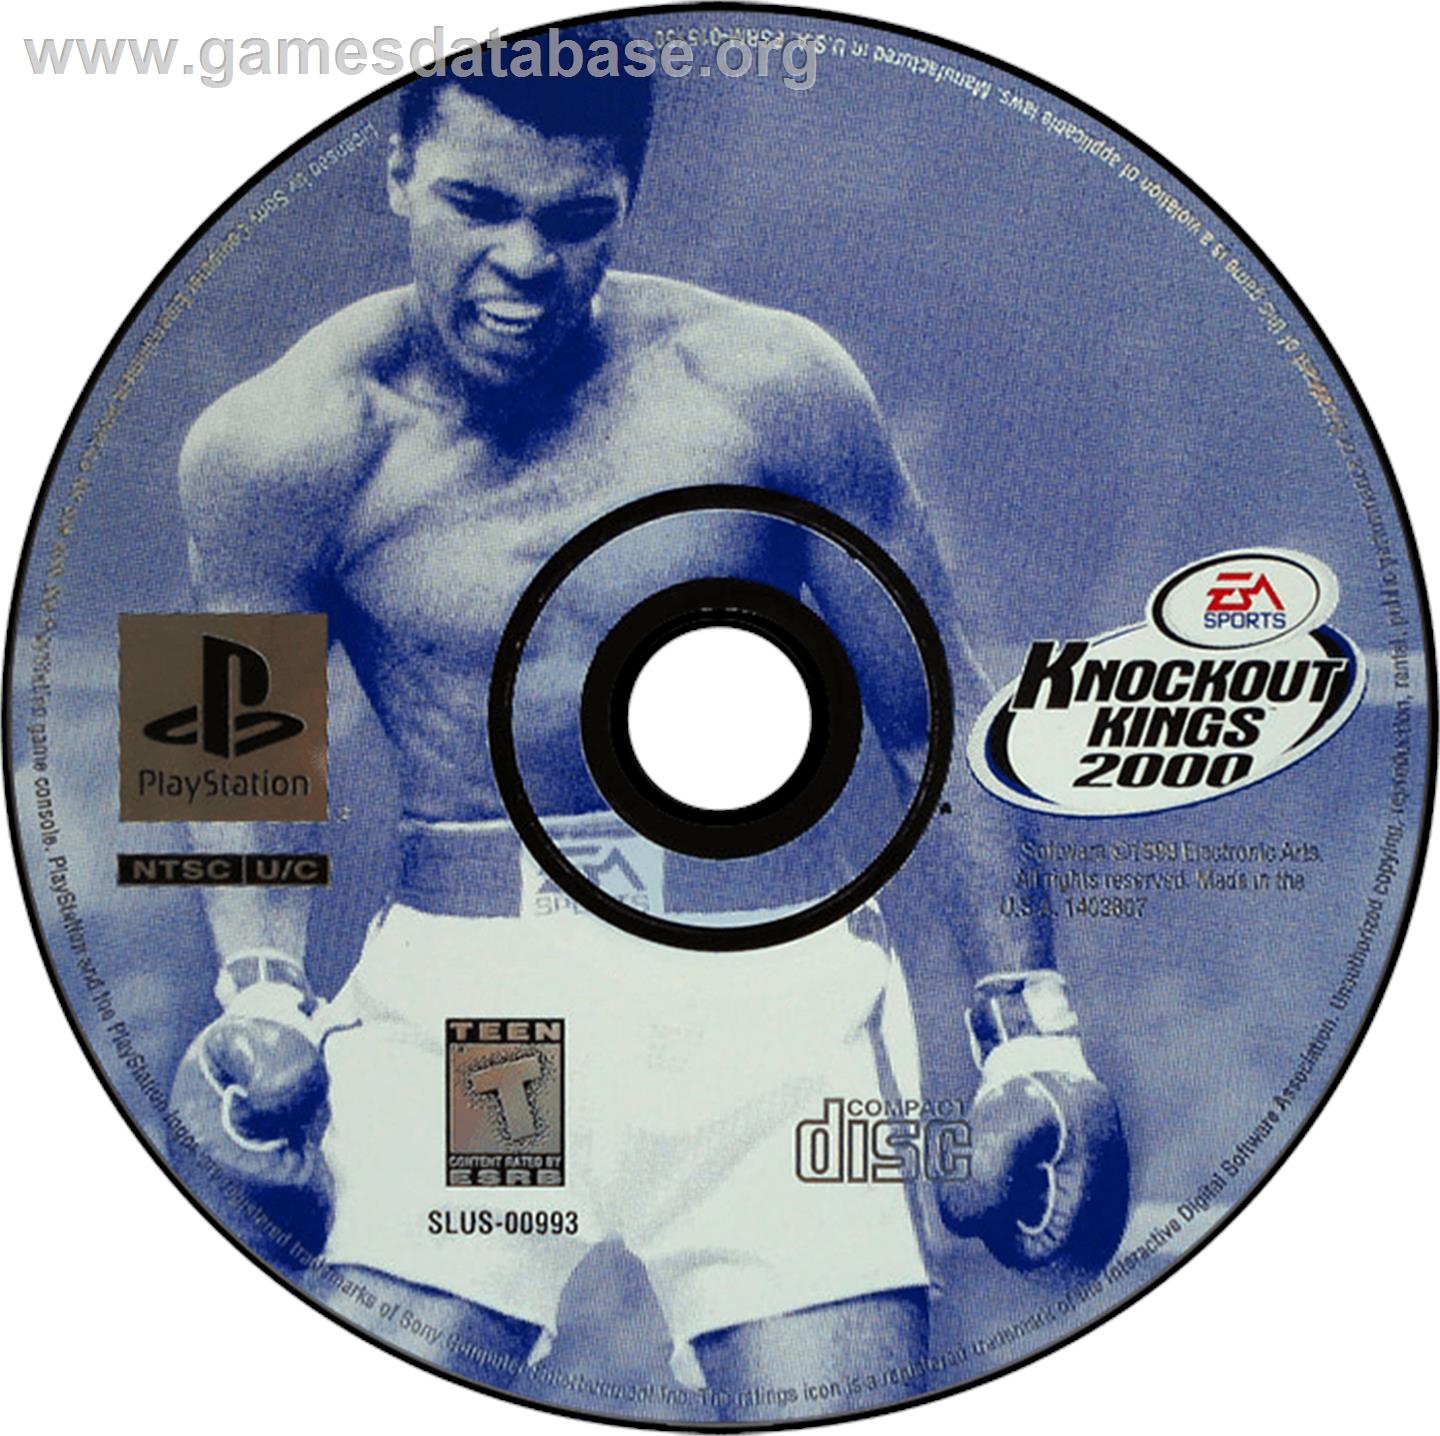 Knockout Kings 2000 - Sony Playstation - Artwork - Disc